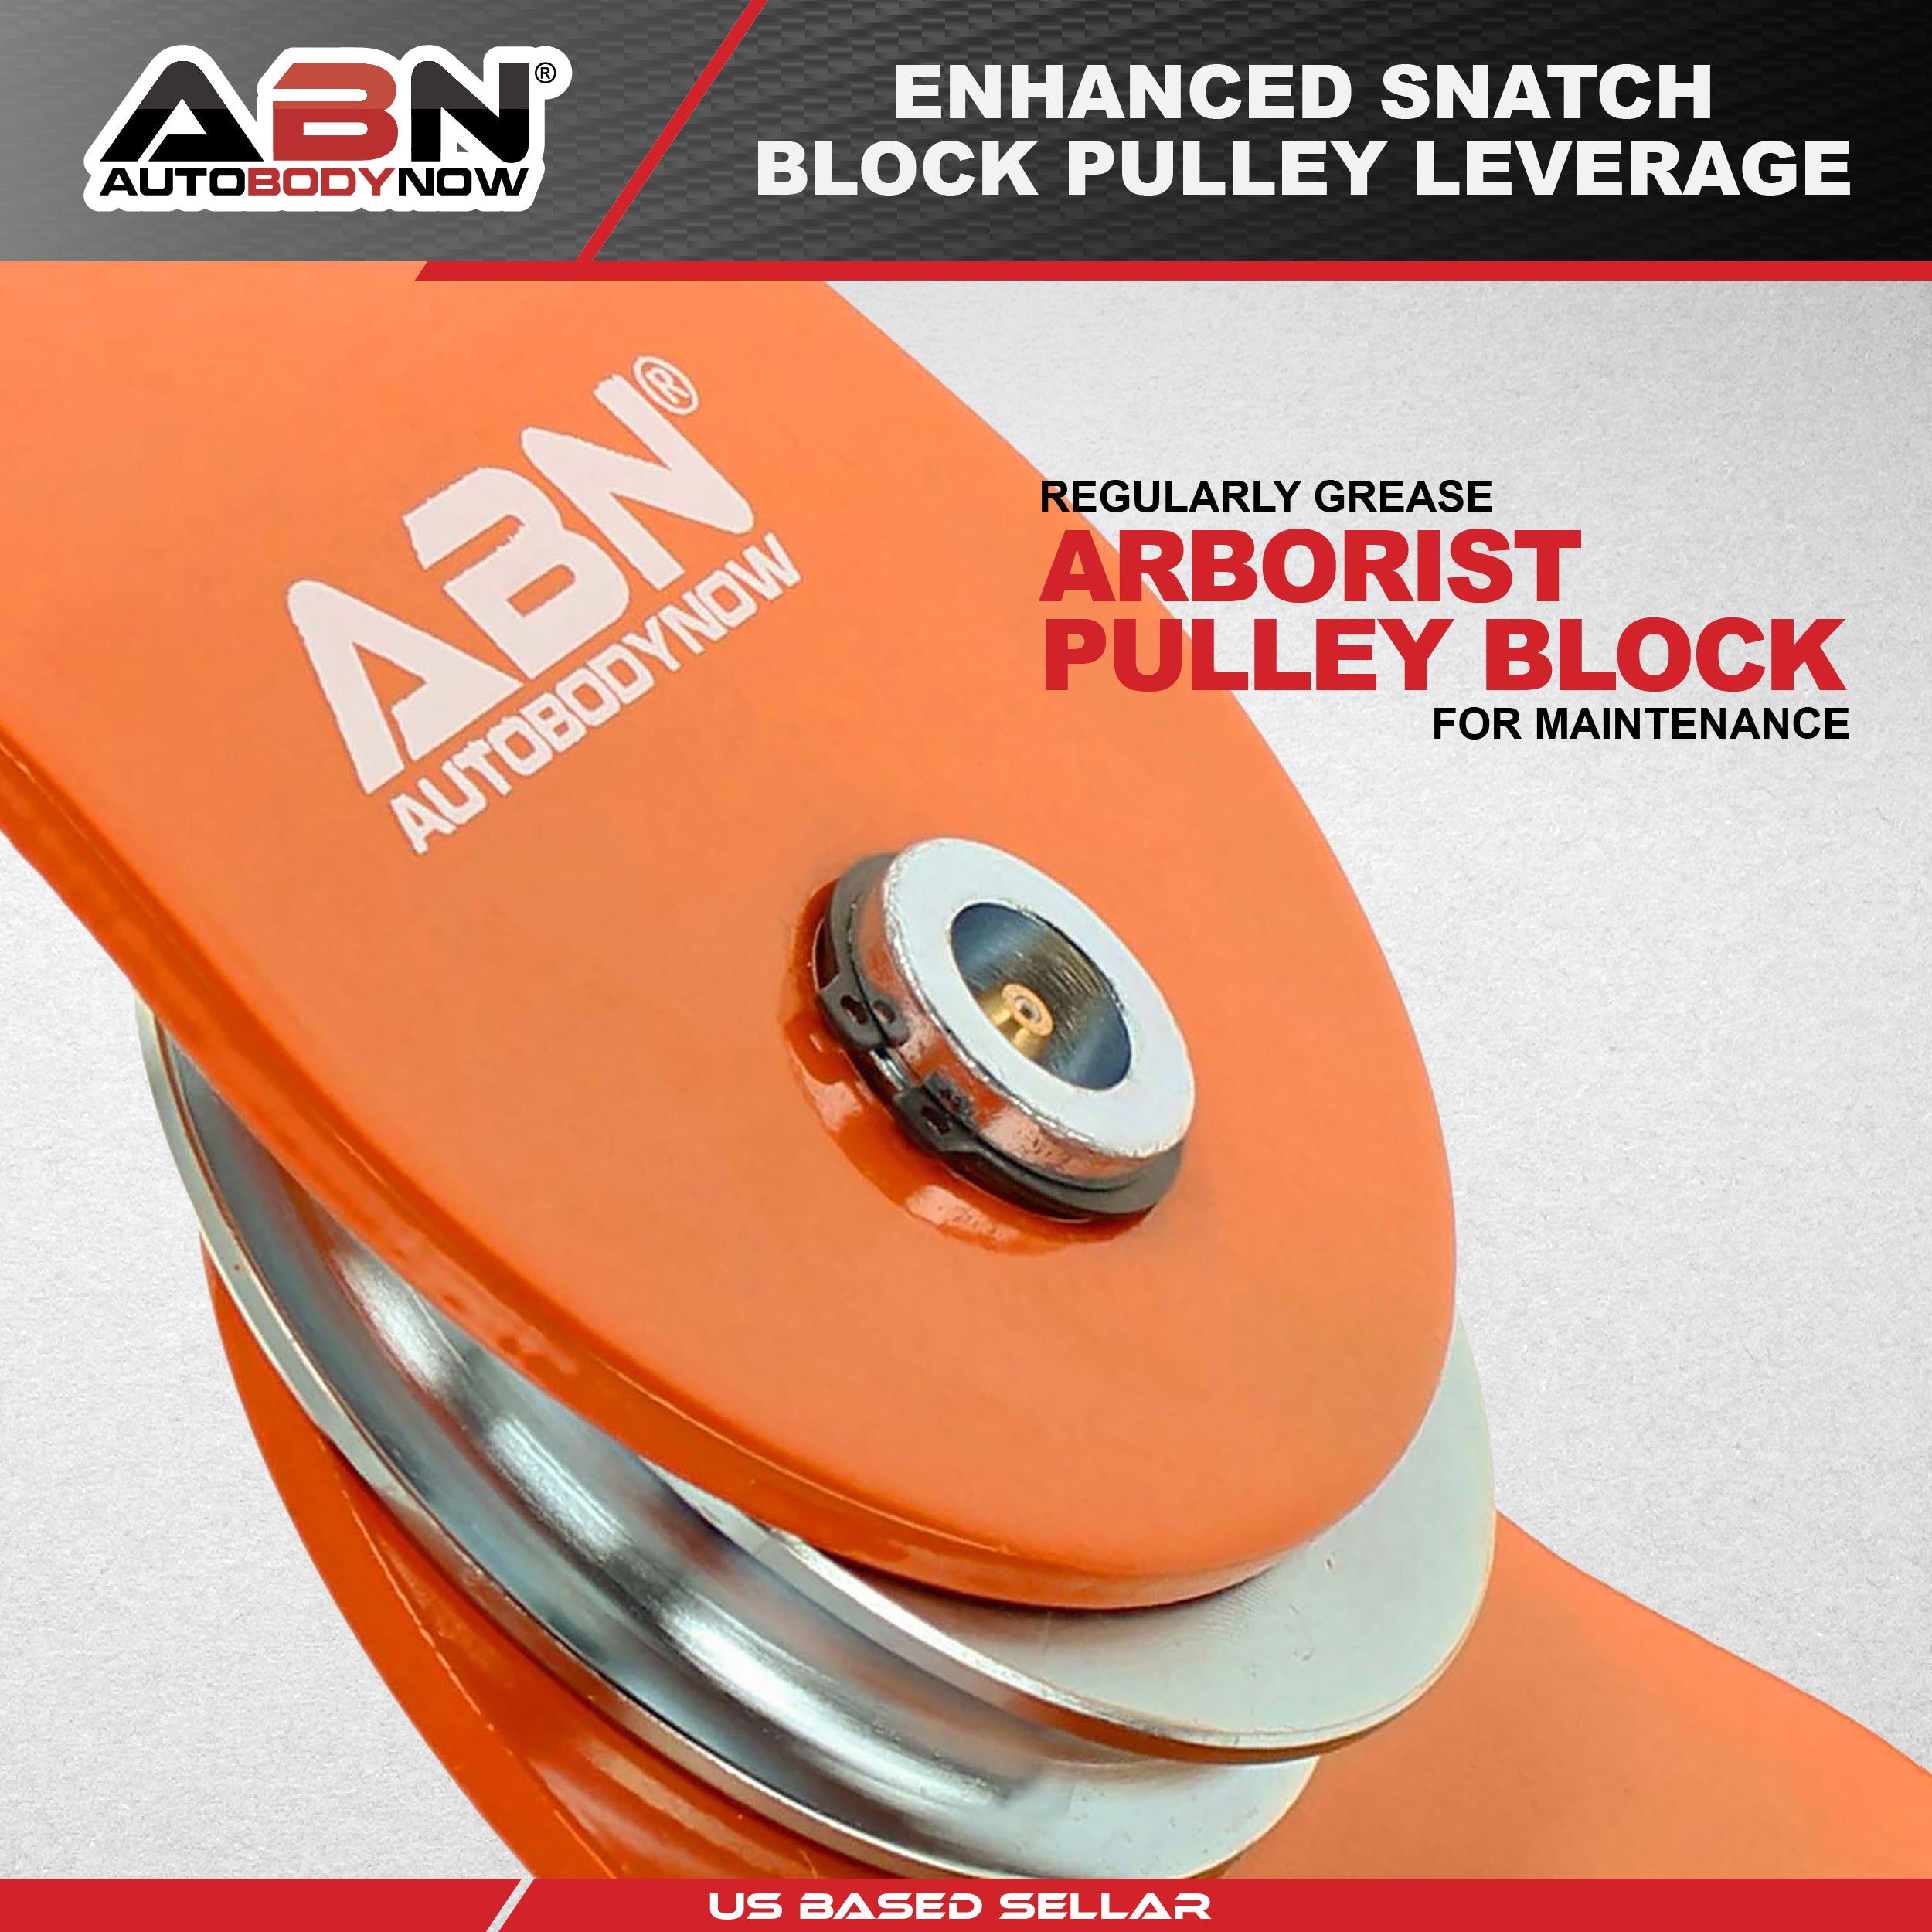 Cable Pulley Snatch Blocks for Winches - 22,000lbs Capacity 1pk Pulley